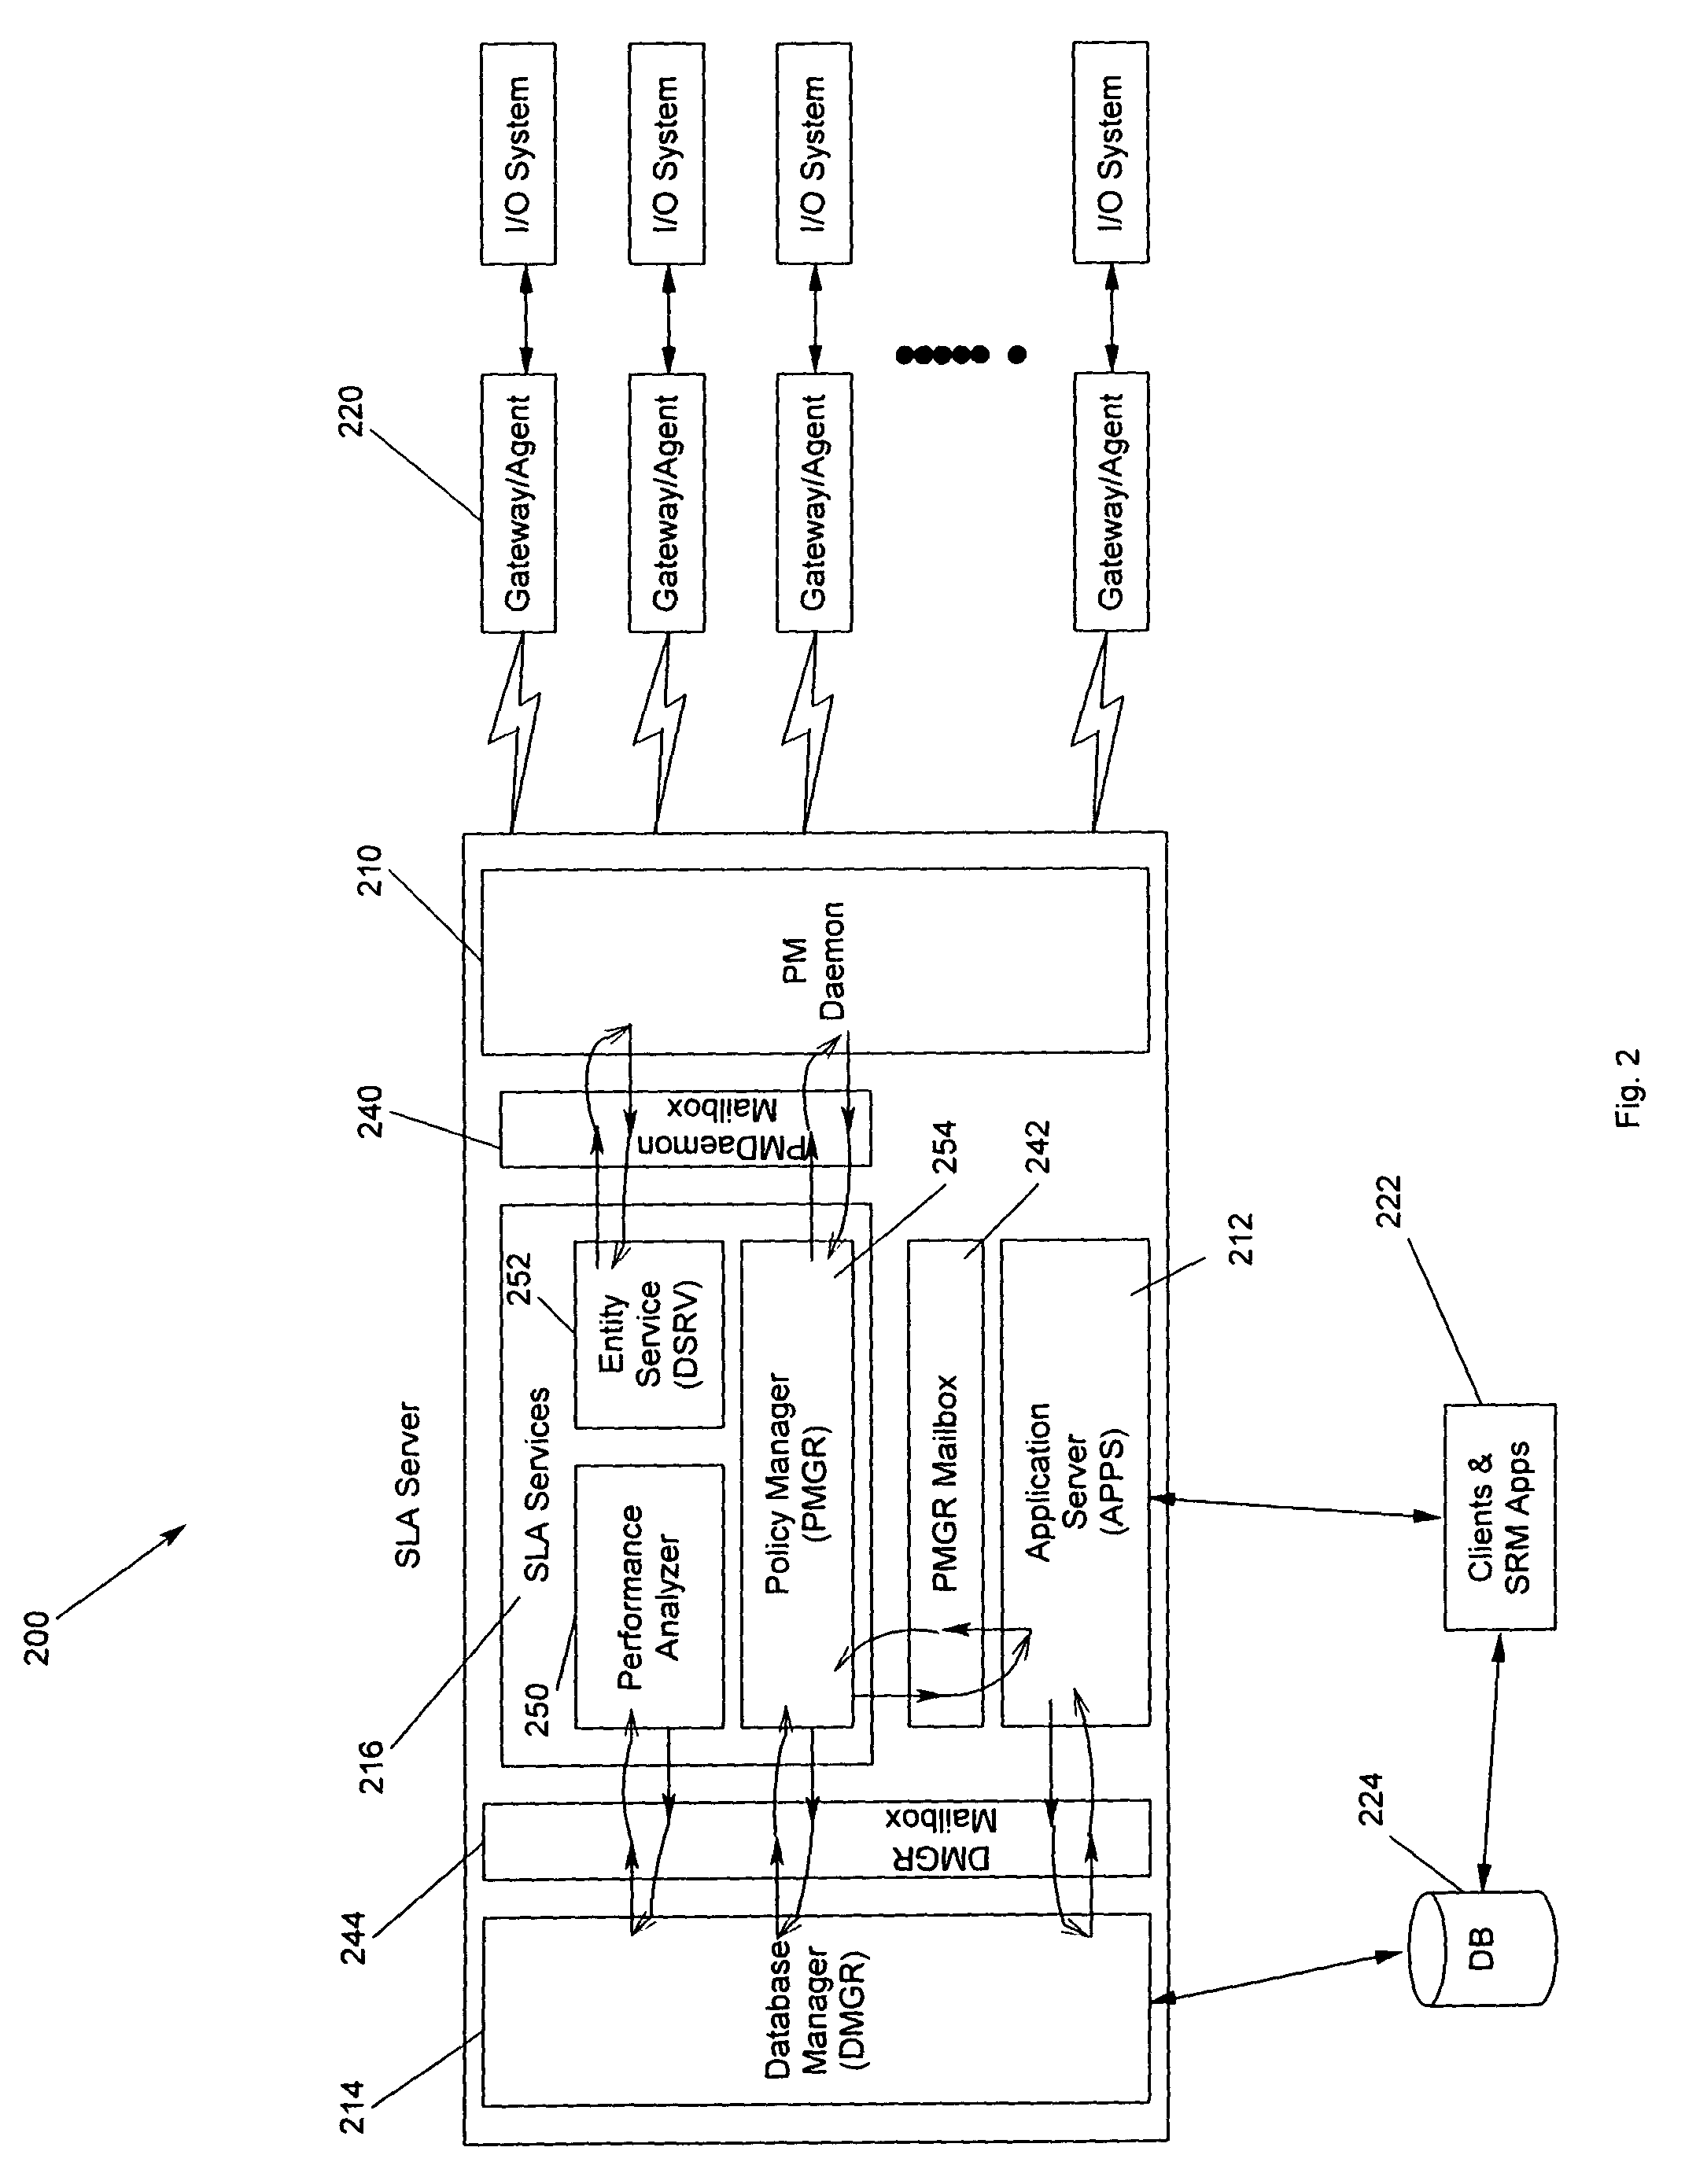 Method for improving performance in a computer storage system by regulating resource requests from clients